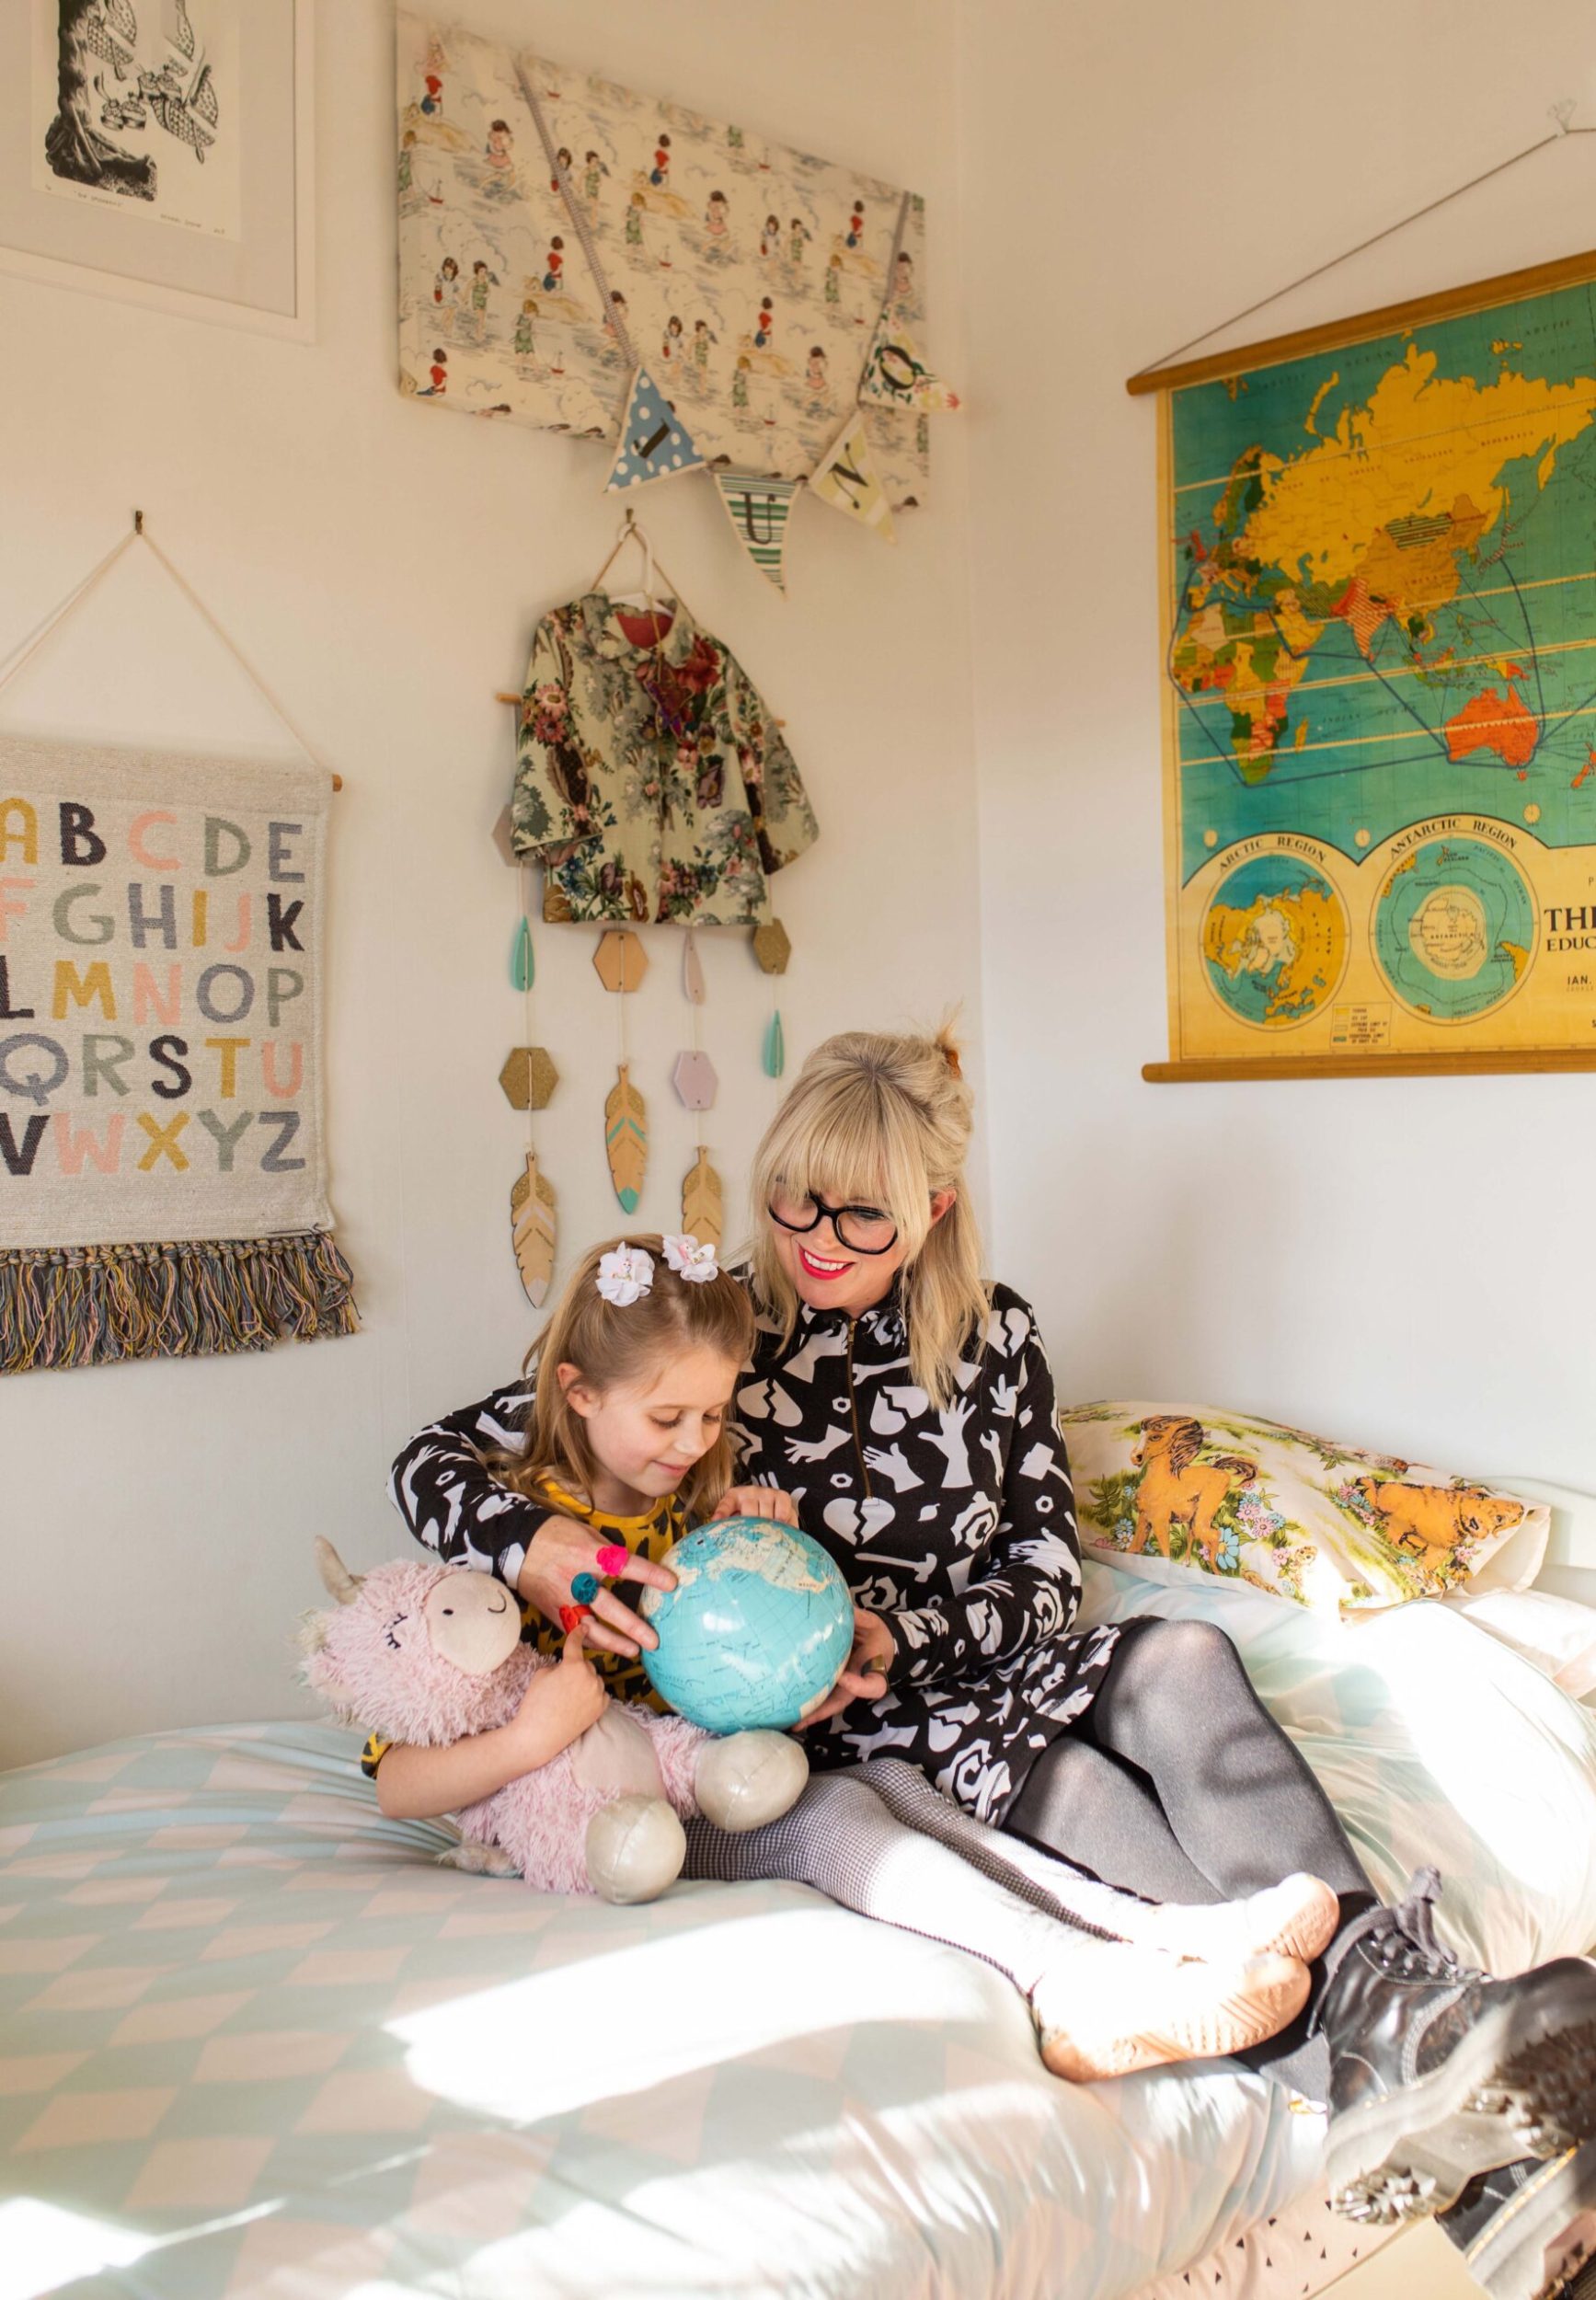 Rachel Stone and her daughter Juno sitting on her bed with art on the walls